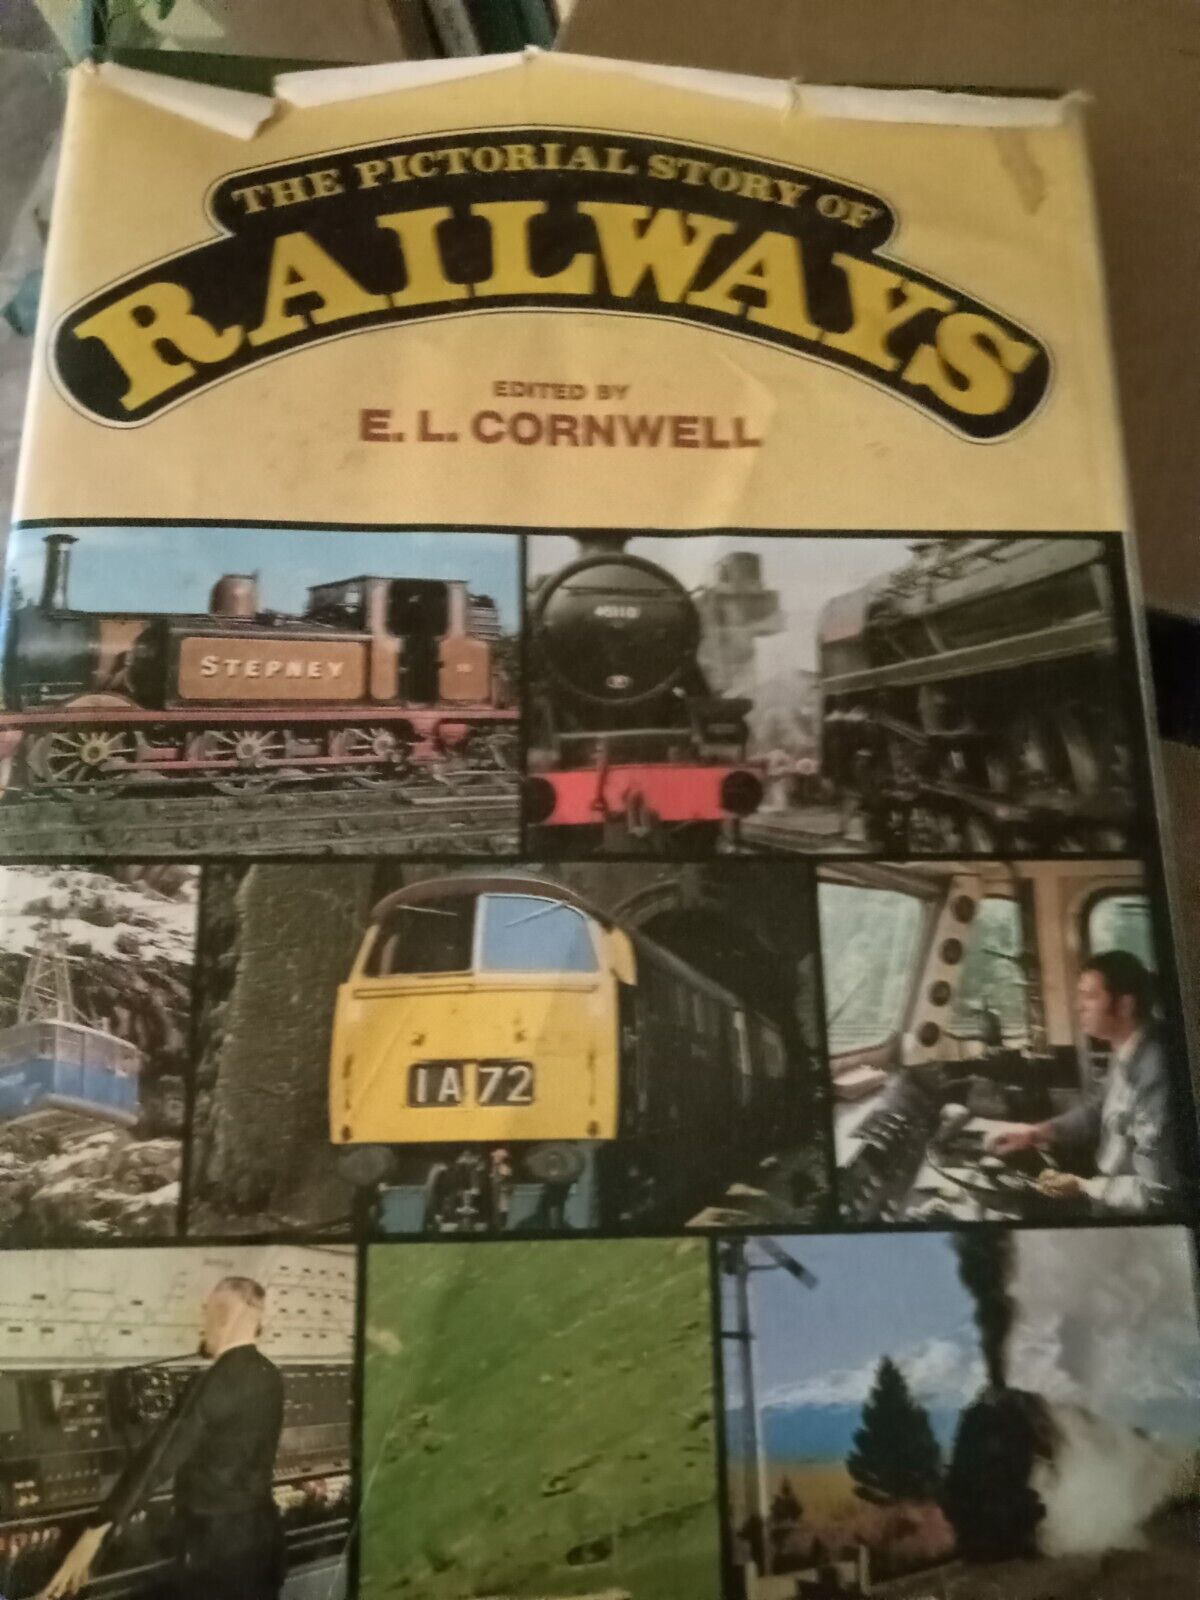 The Pictorial Story of Railways E.L.Cornwell 1974